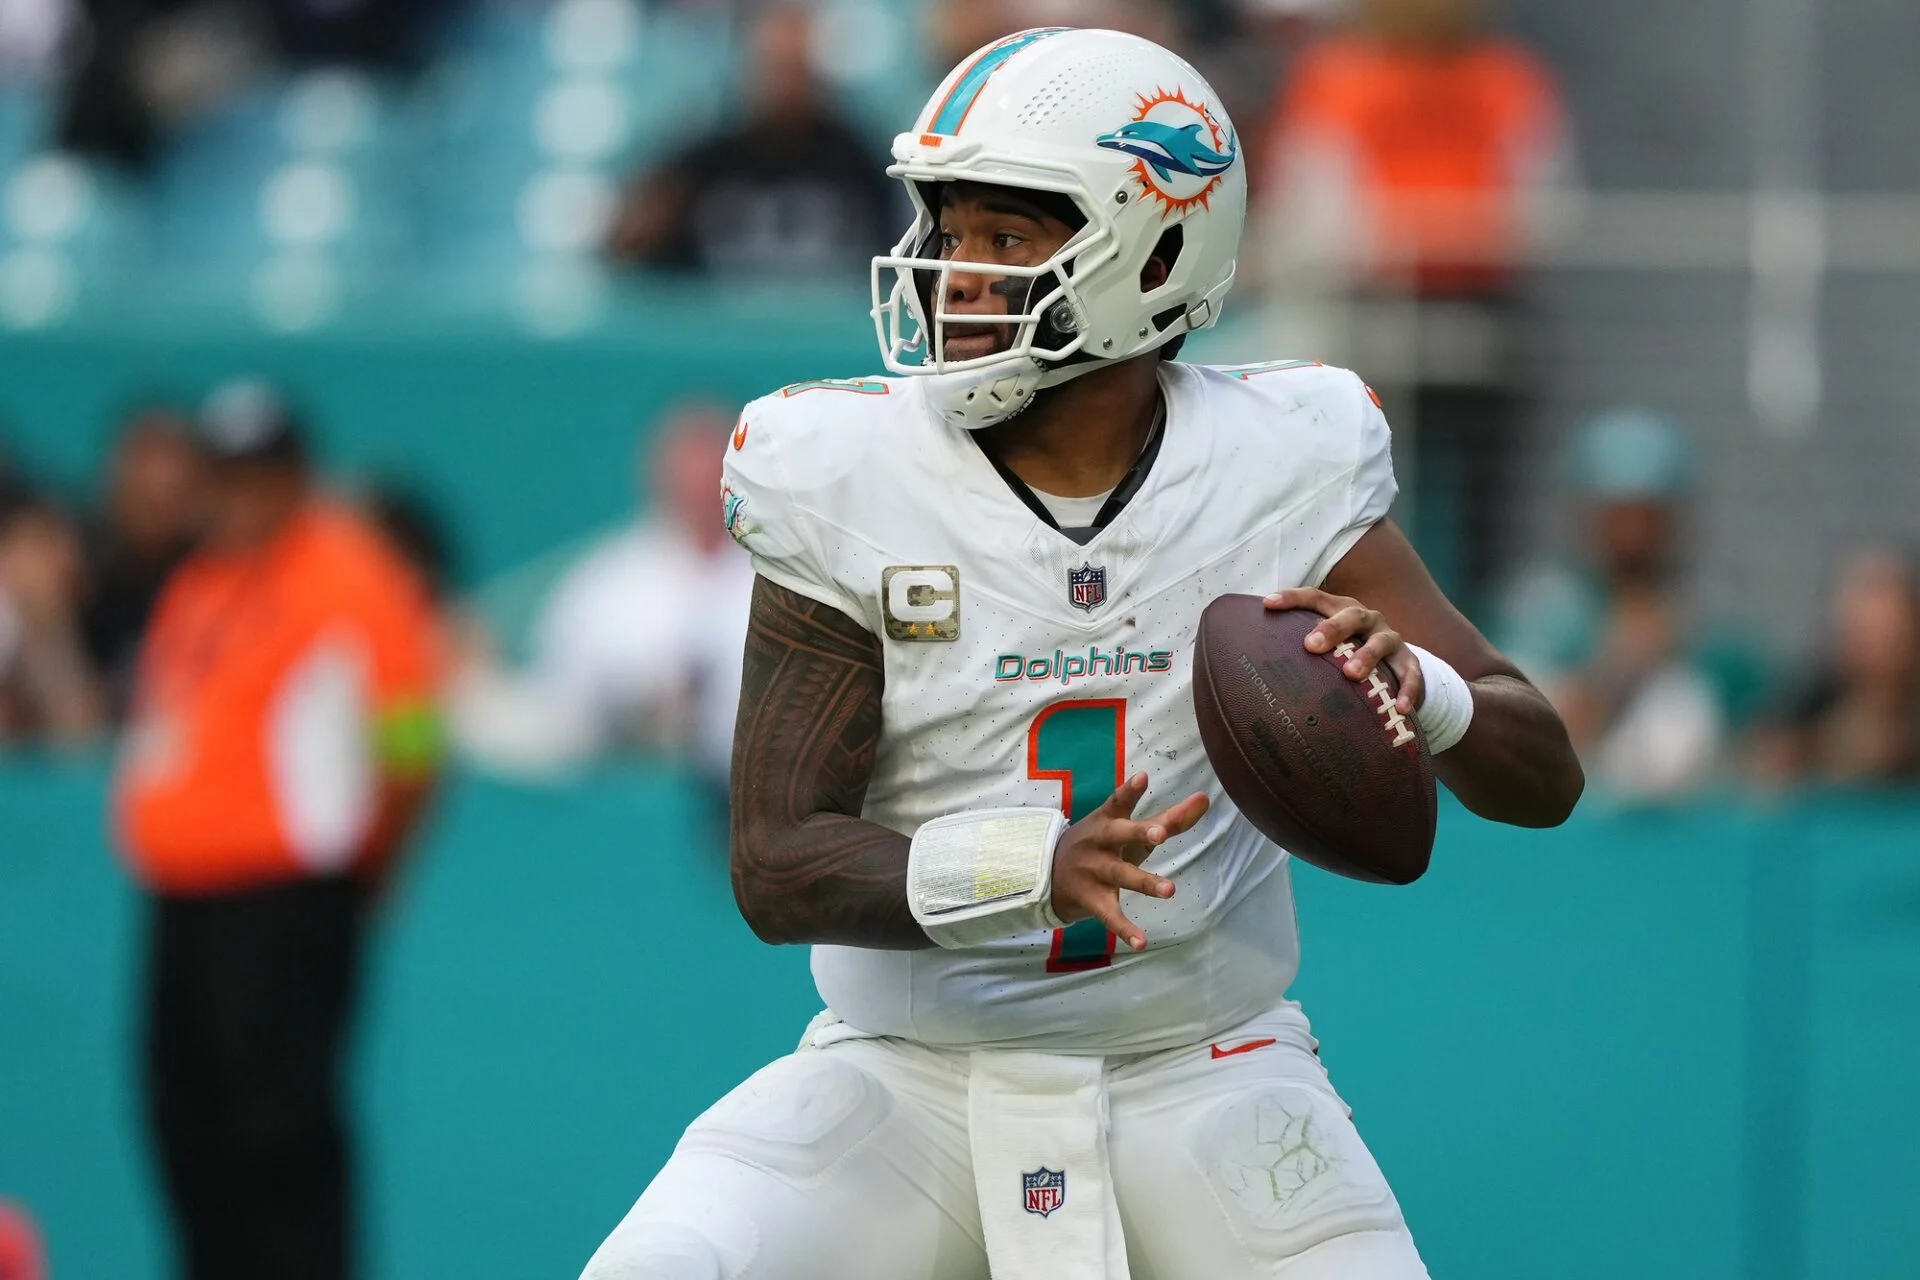 NFL News: Miami Dolphins Stay Active in Draft Talks, Will They Shake Up the NFL Draft Tonight?